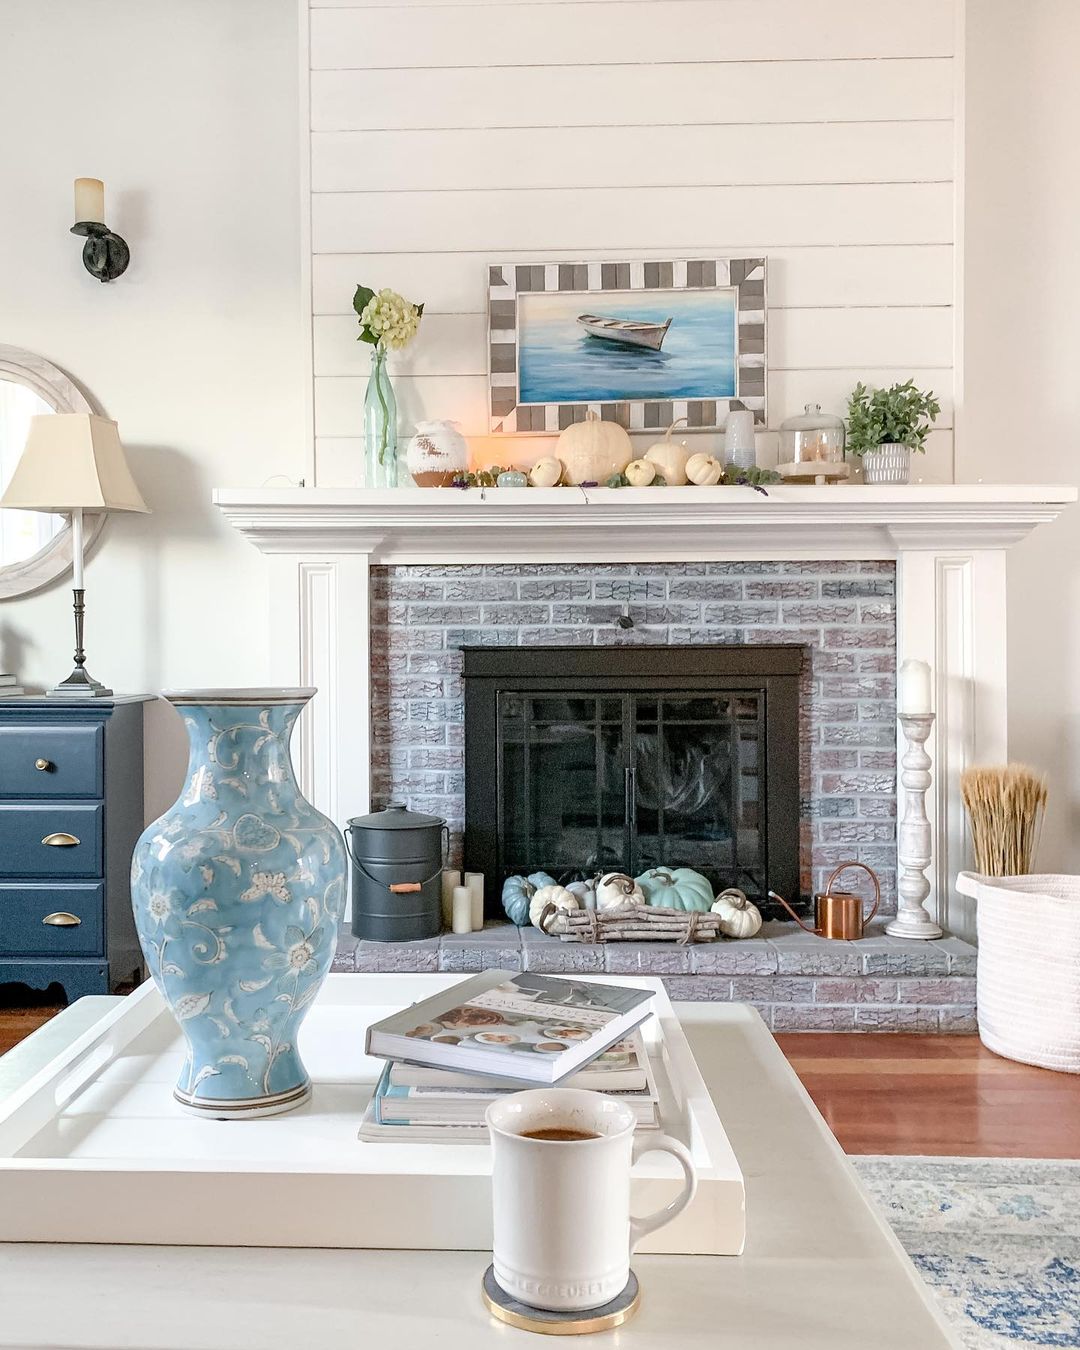 Embrace Shiplap for a Nautical Touch